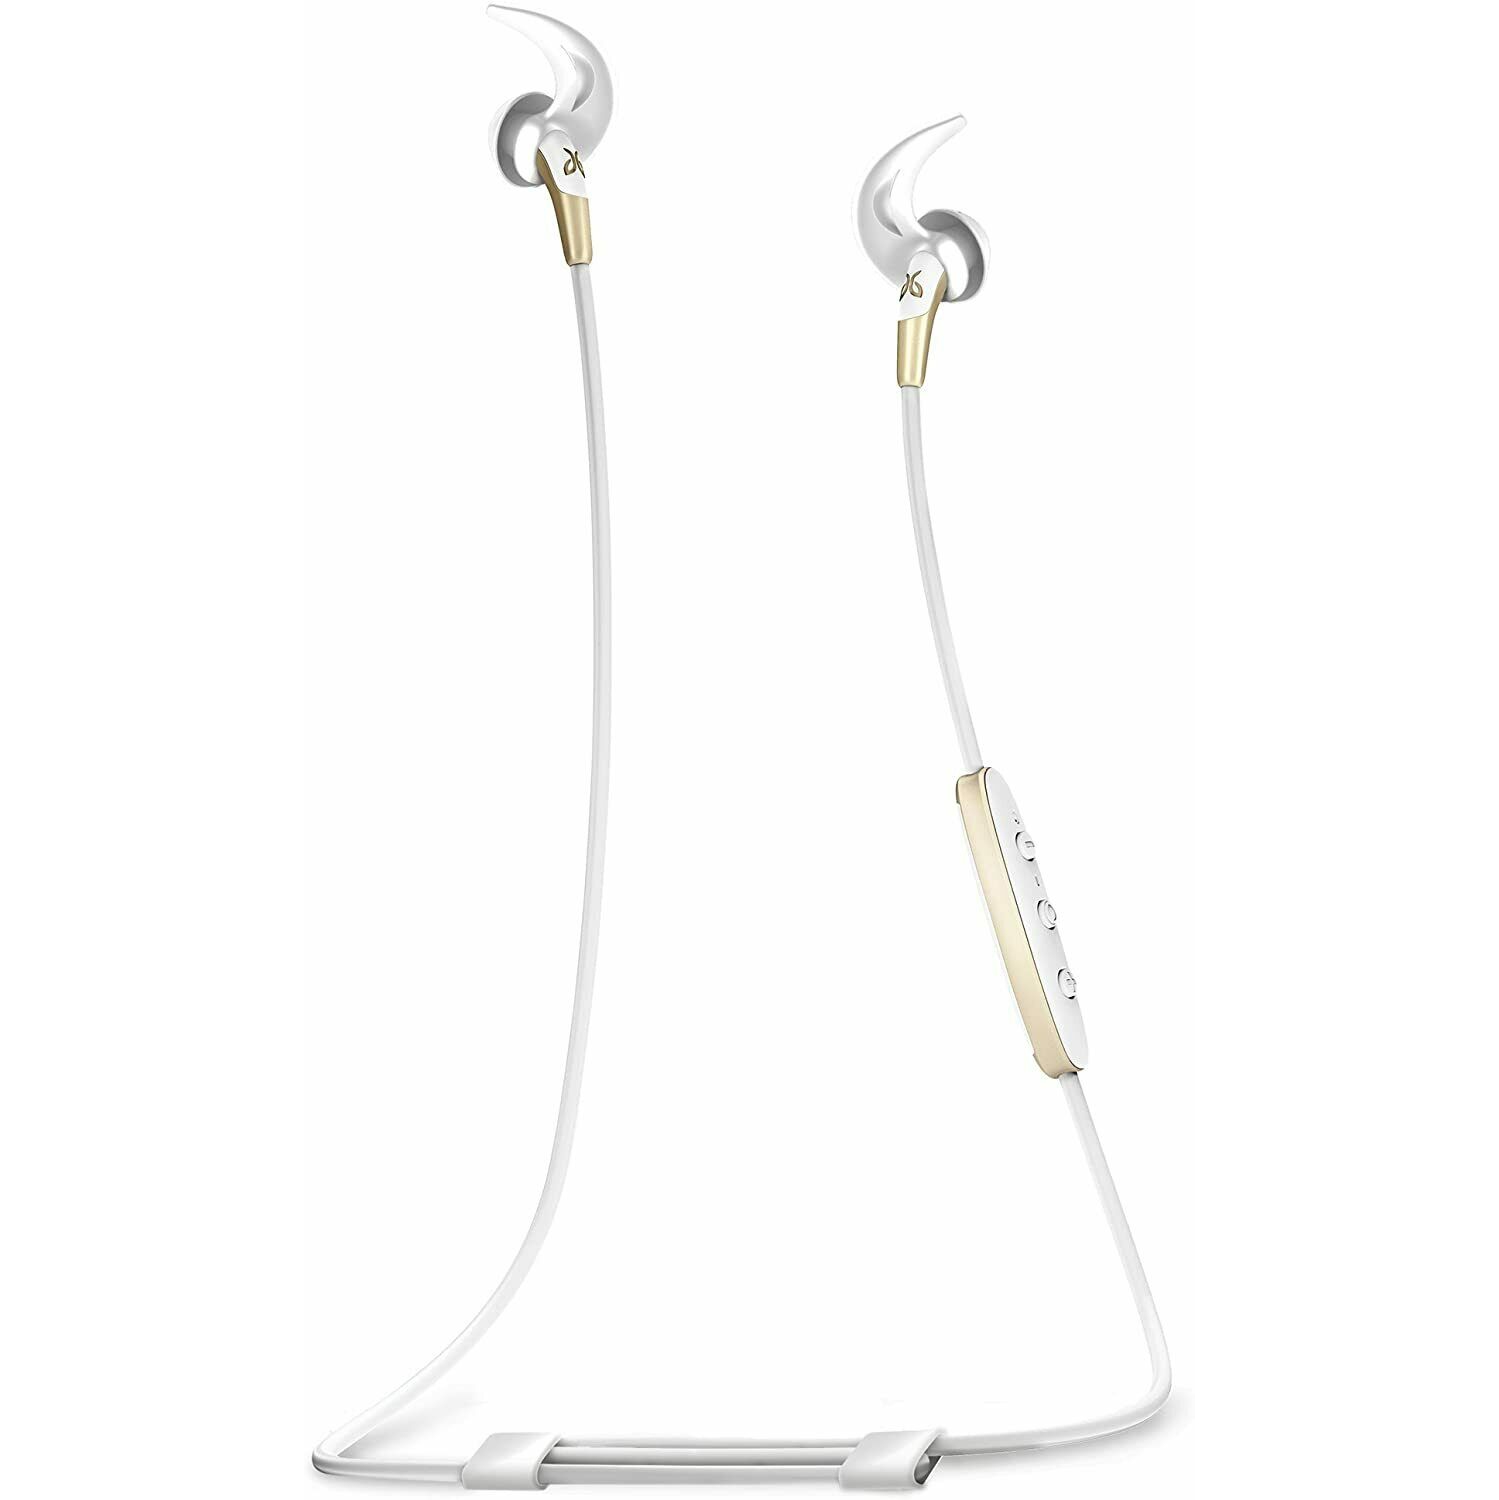 Refurbished (Excellent) - Jaybird Freedom 2 In-Ear Wireless Bluetooth Sport Headphones with SpeedFit – White / Gold - Certified Refurbished